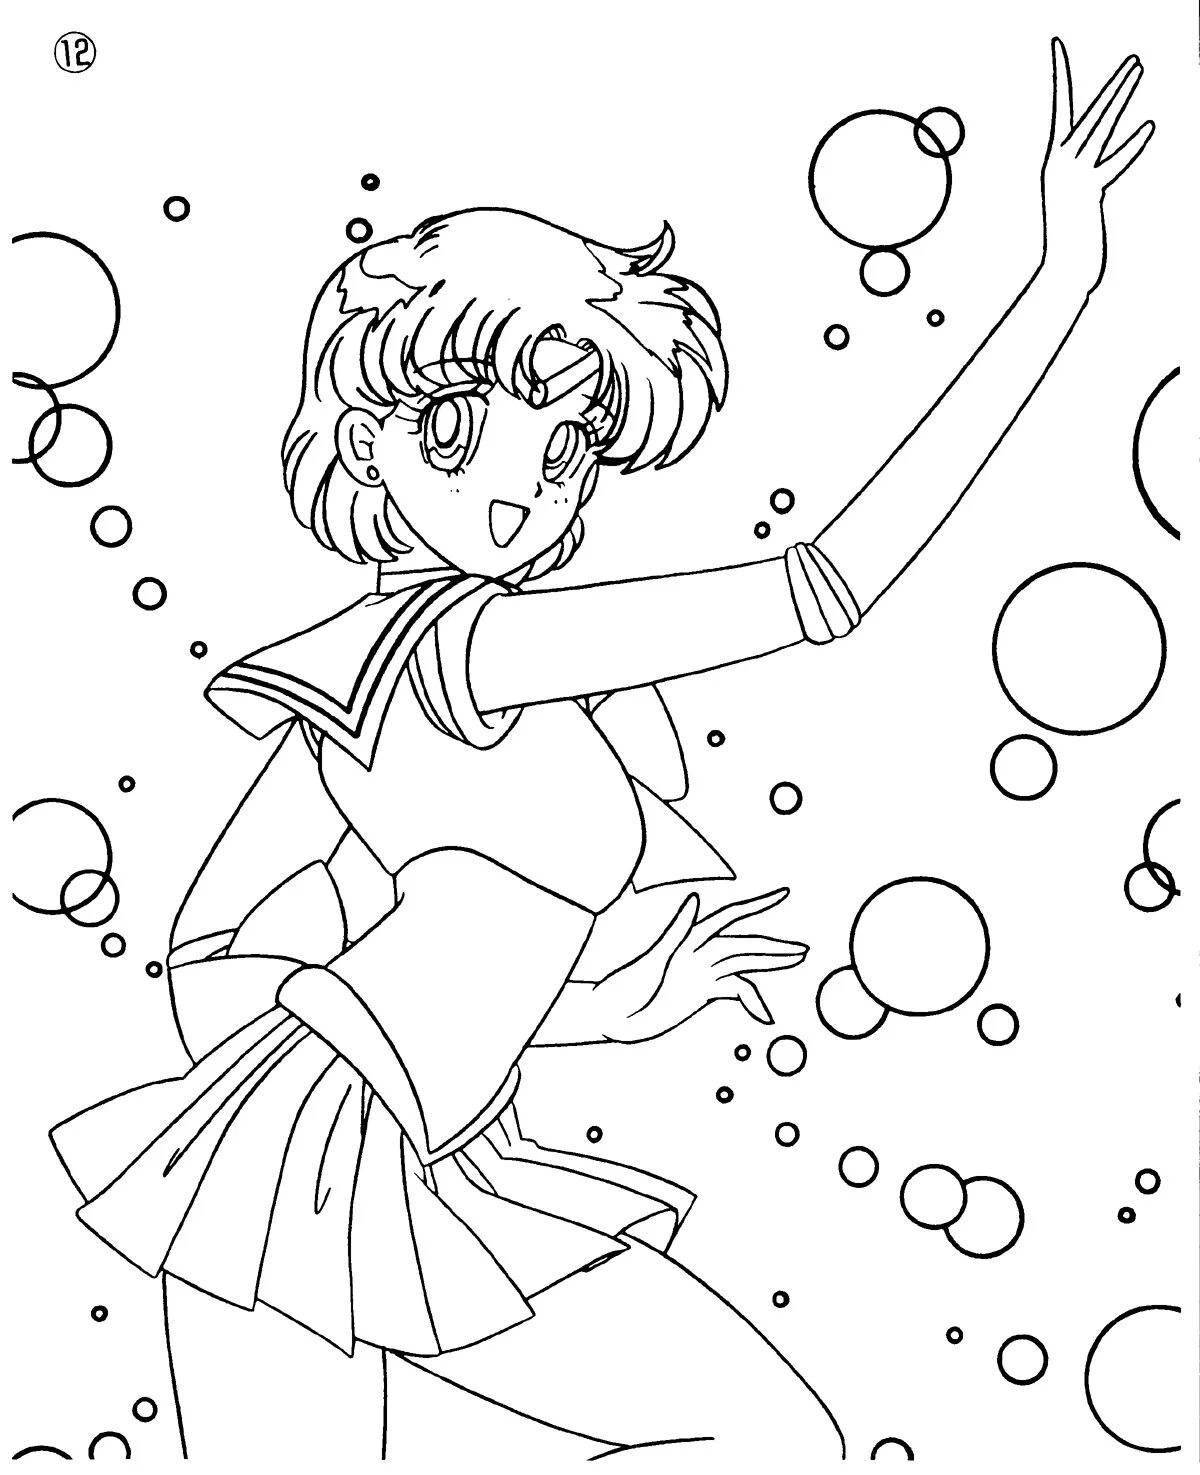 Coloring page mysterious mercury